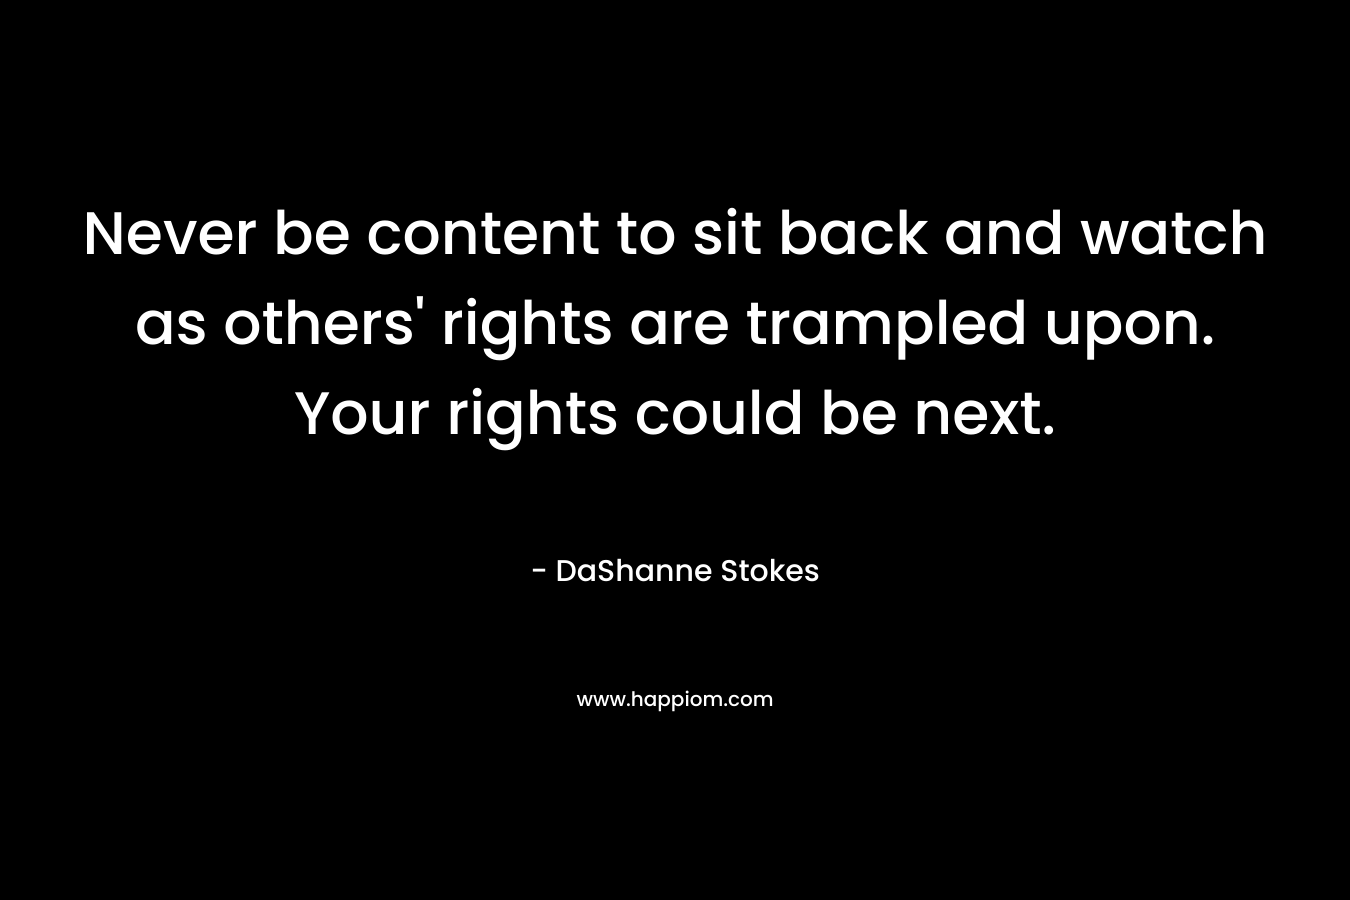 Never be content to sit back and watch as others' rights are trampled upon. Your rights could be next.